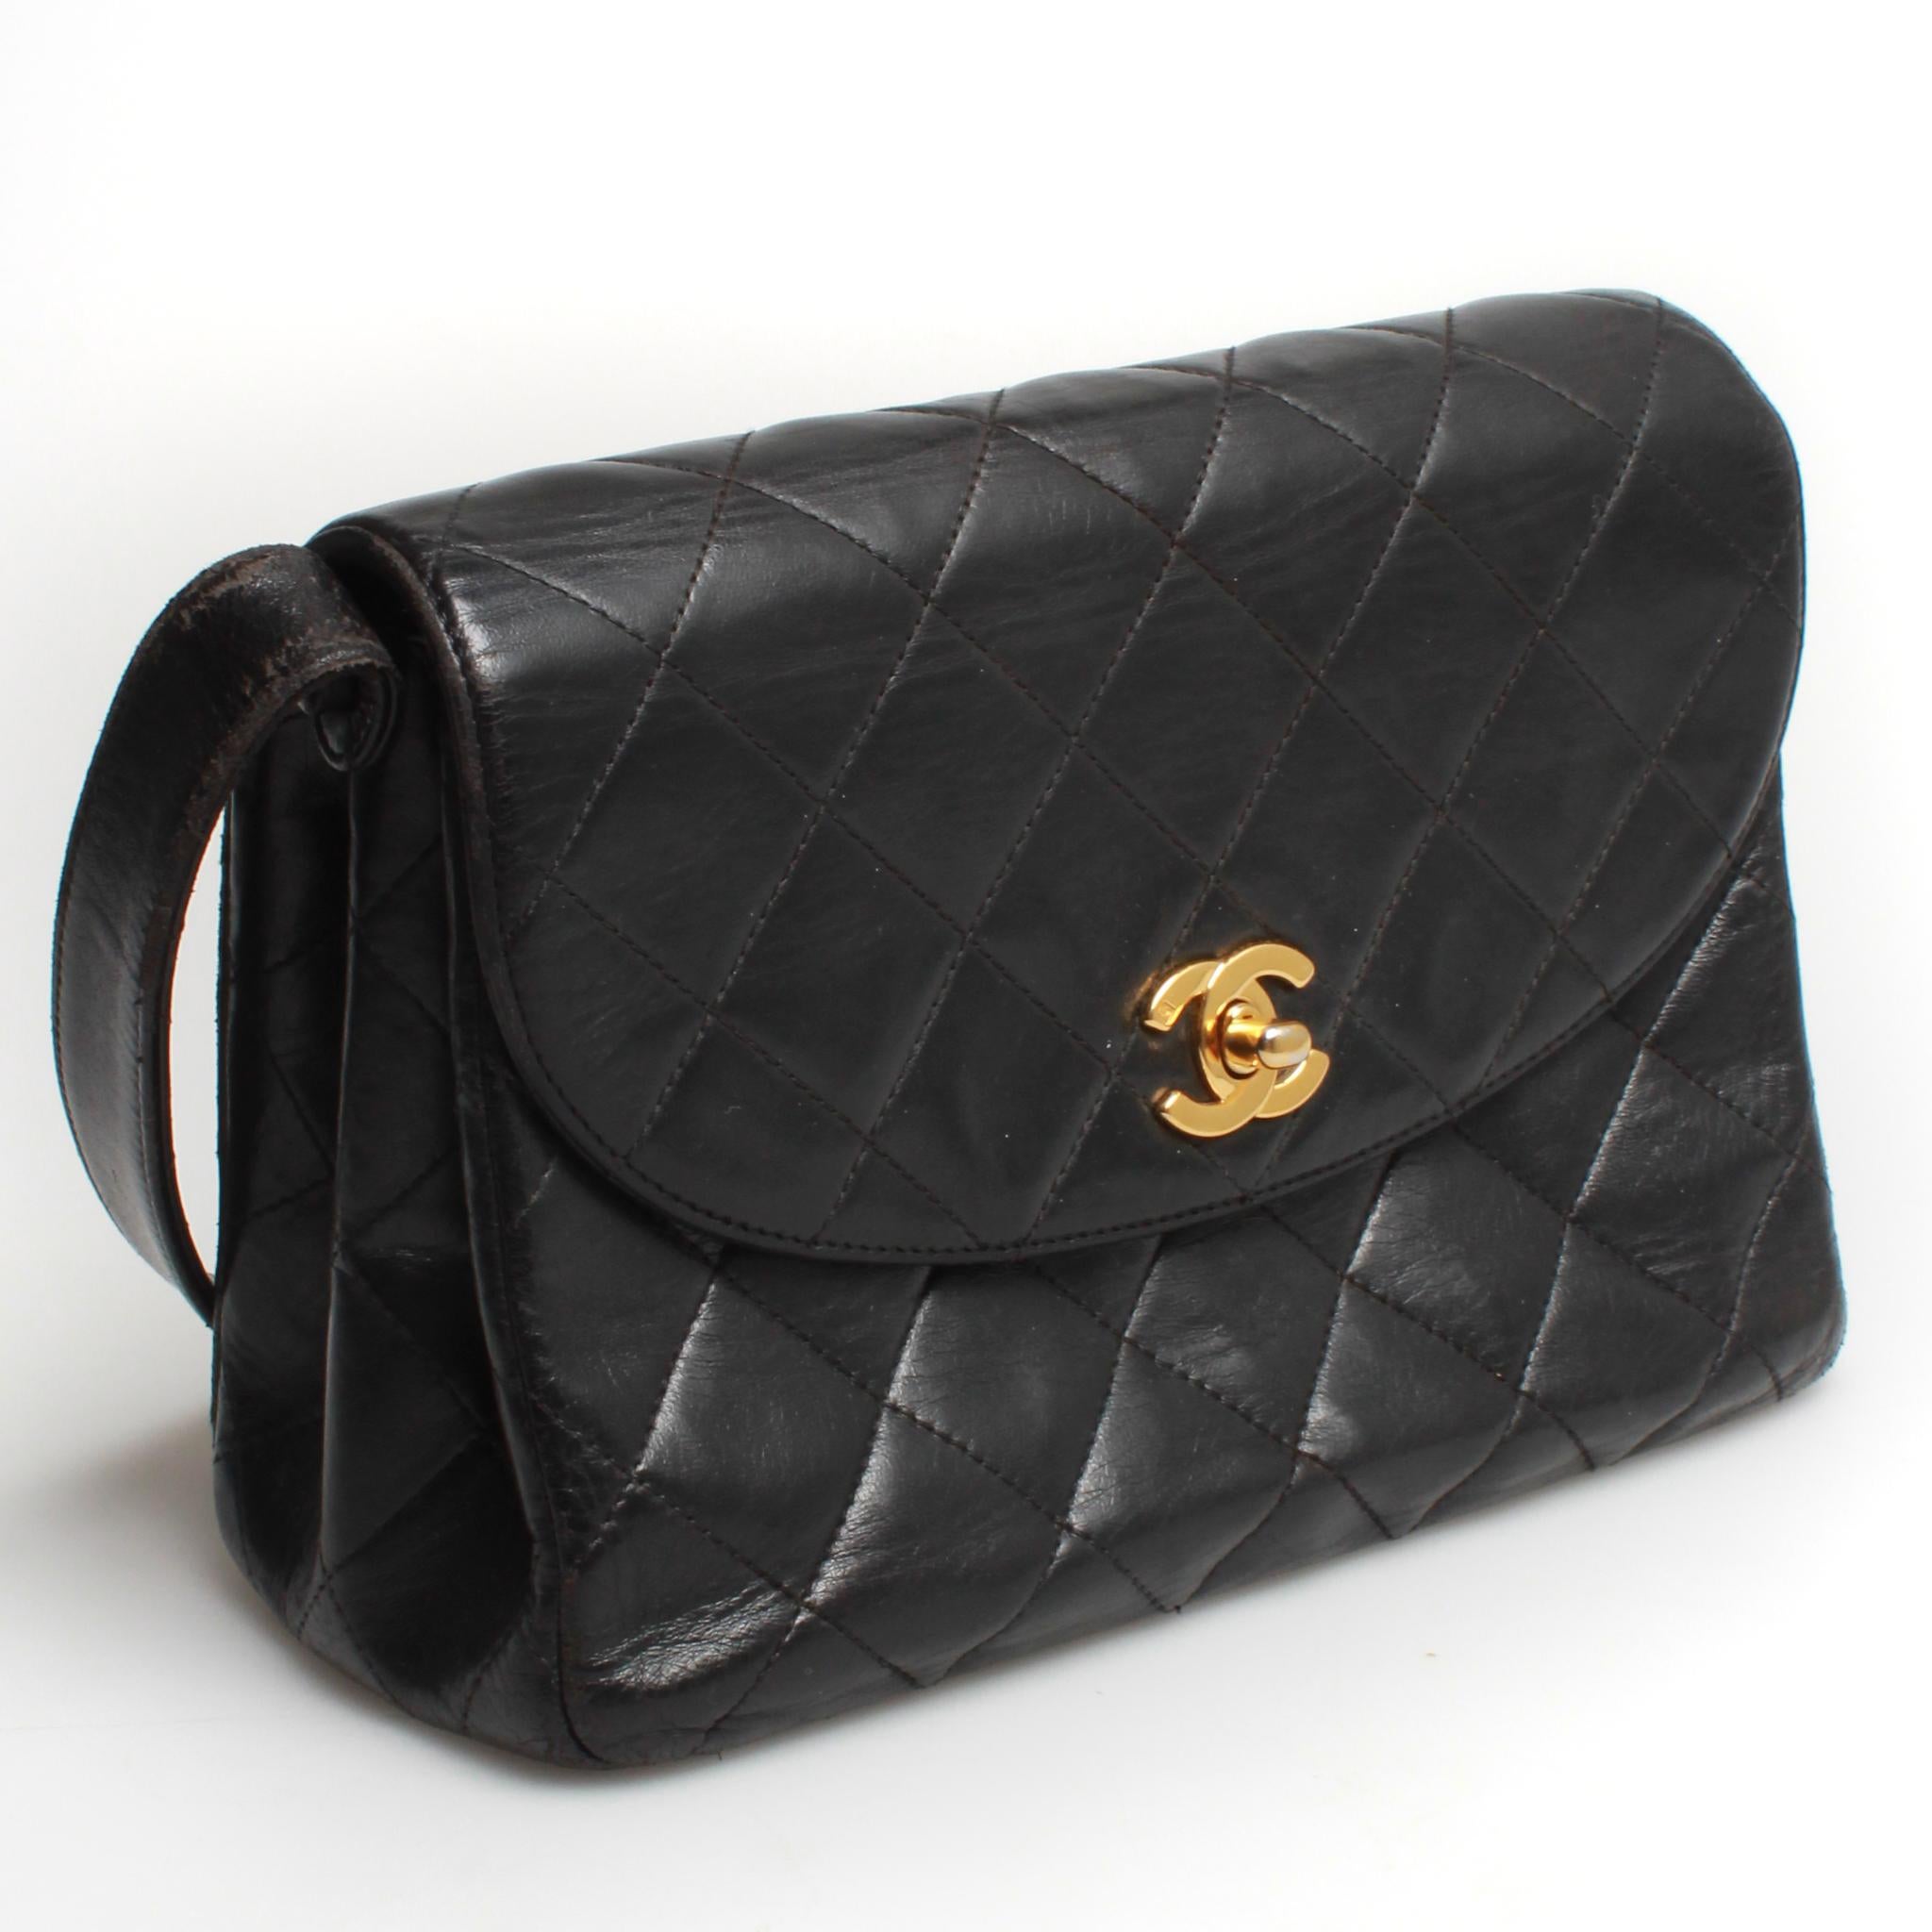 Vintage CHANEL black quilted lamskin flap handbag with gold toned hardware, interior zip pocket for valuables and two main leather interior compartments. 